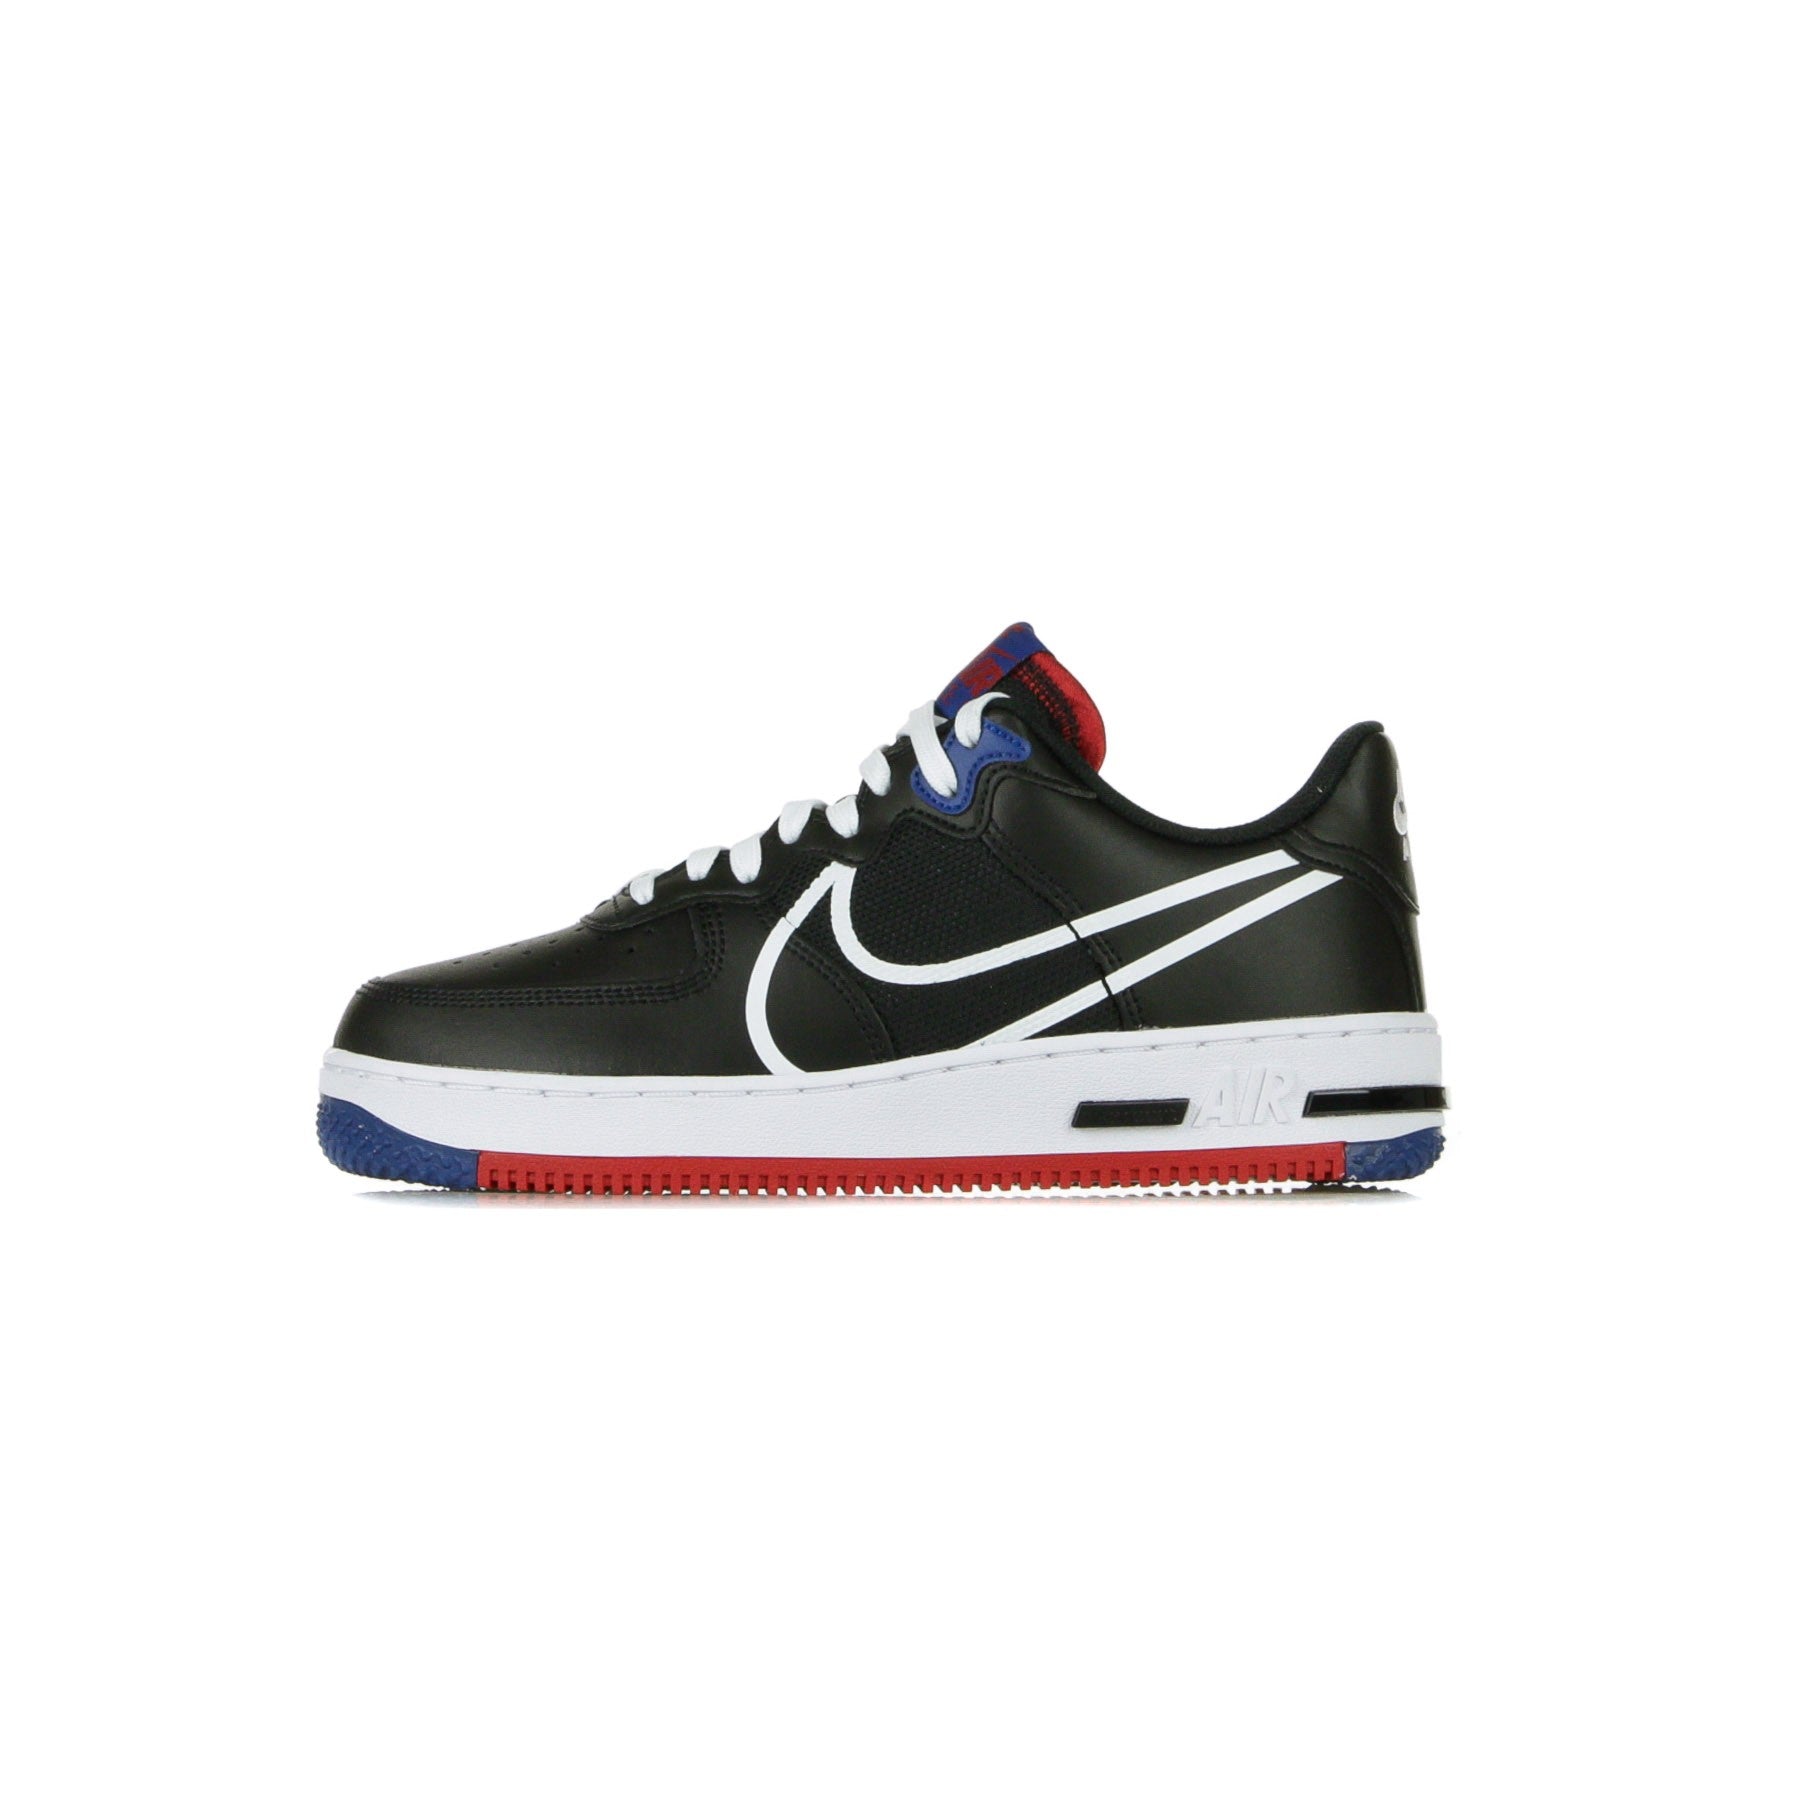 Air Force 1 React Men's Low Shoe Black/white/gym Red/gym Blue